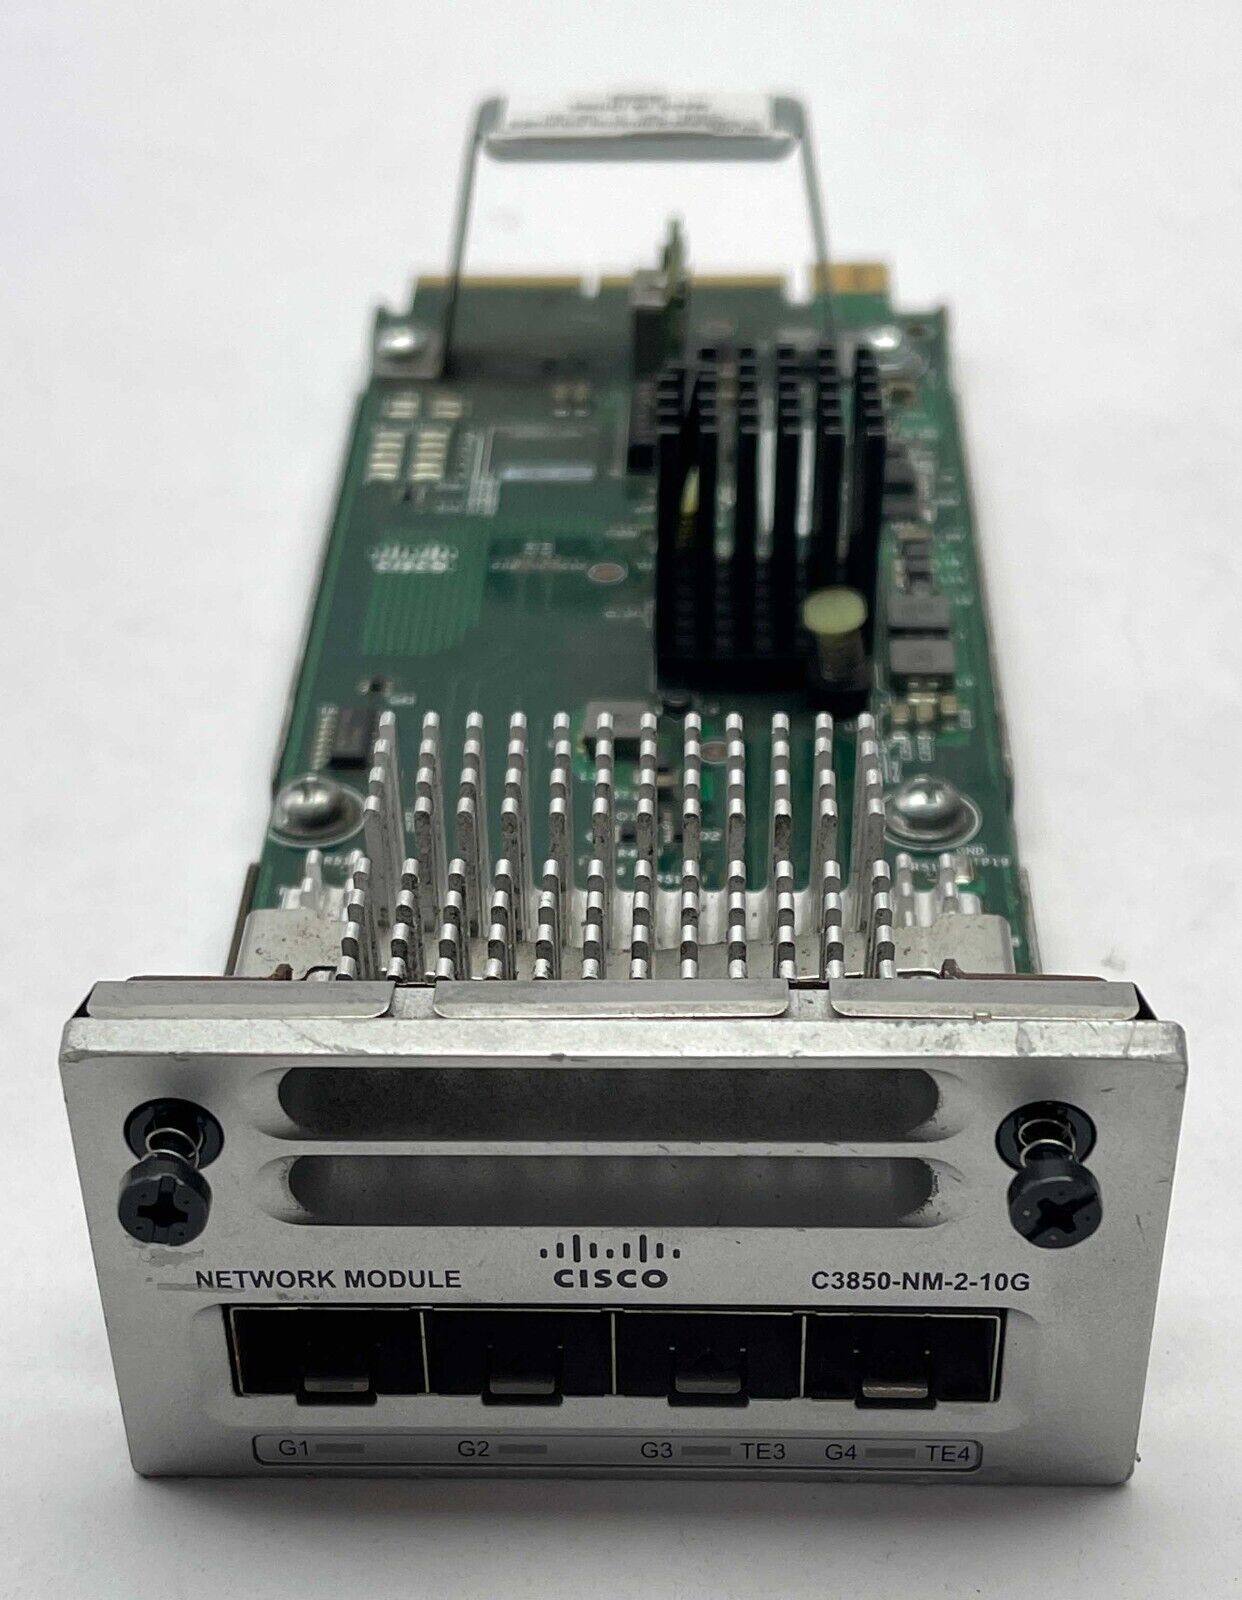 Cisco C3850-NM-2-10G 2-Port 10GB SFP Network Module for 3850 Switches